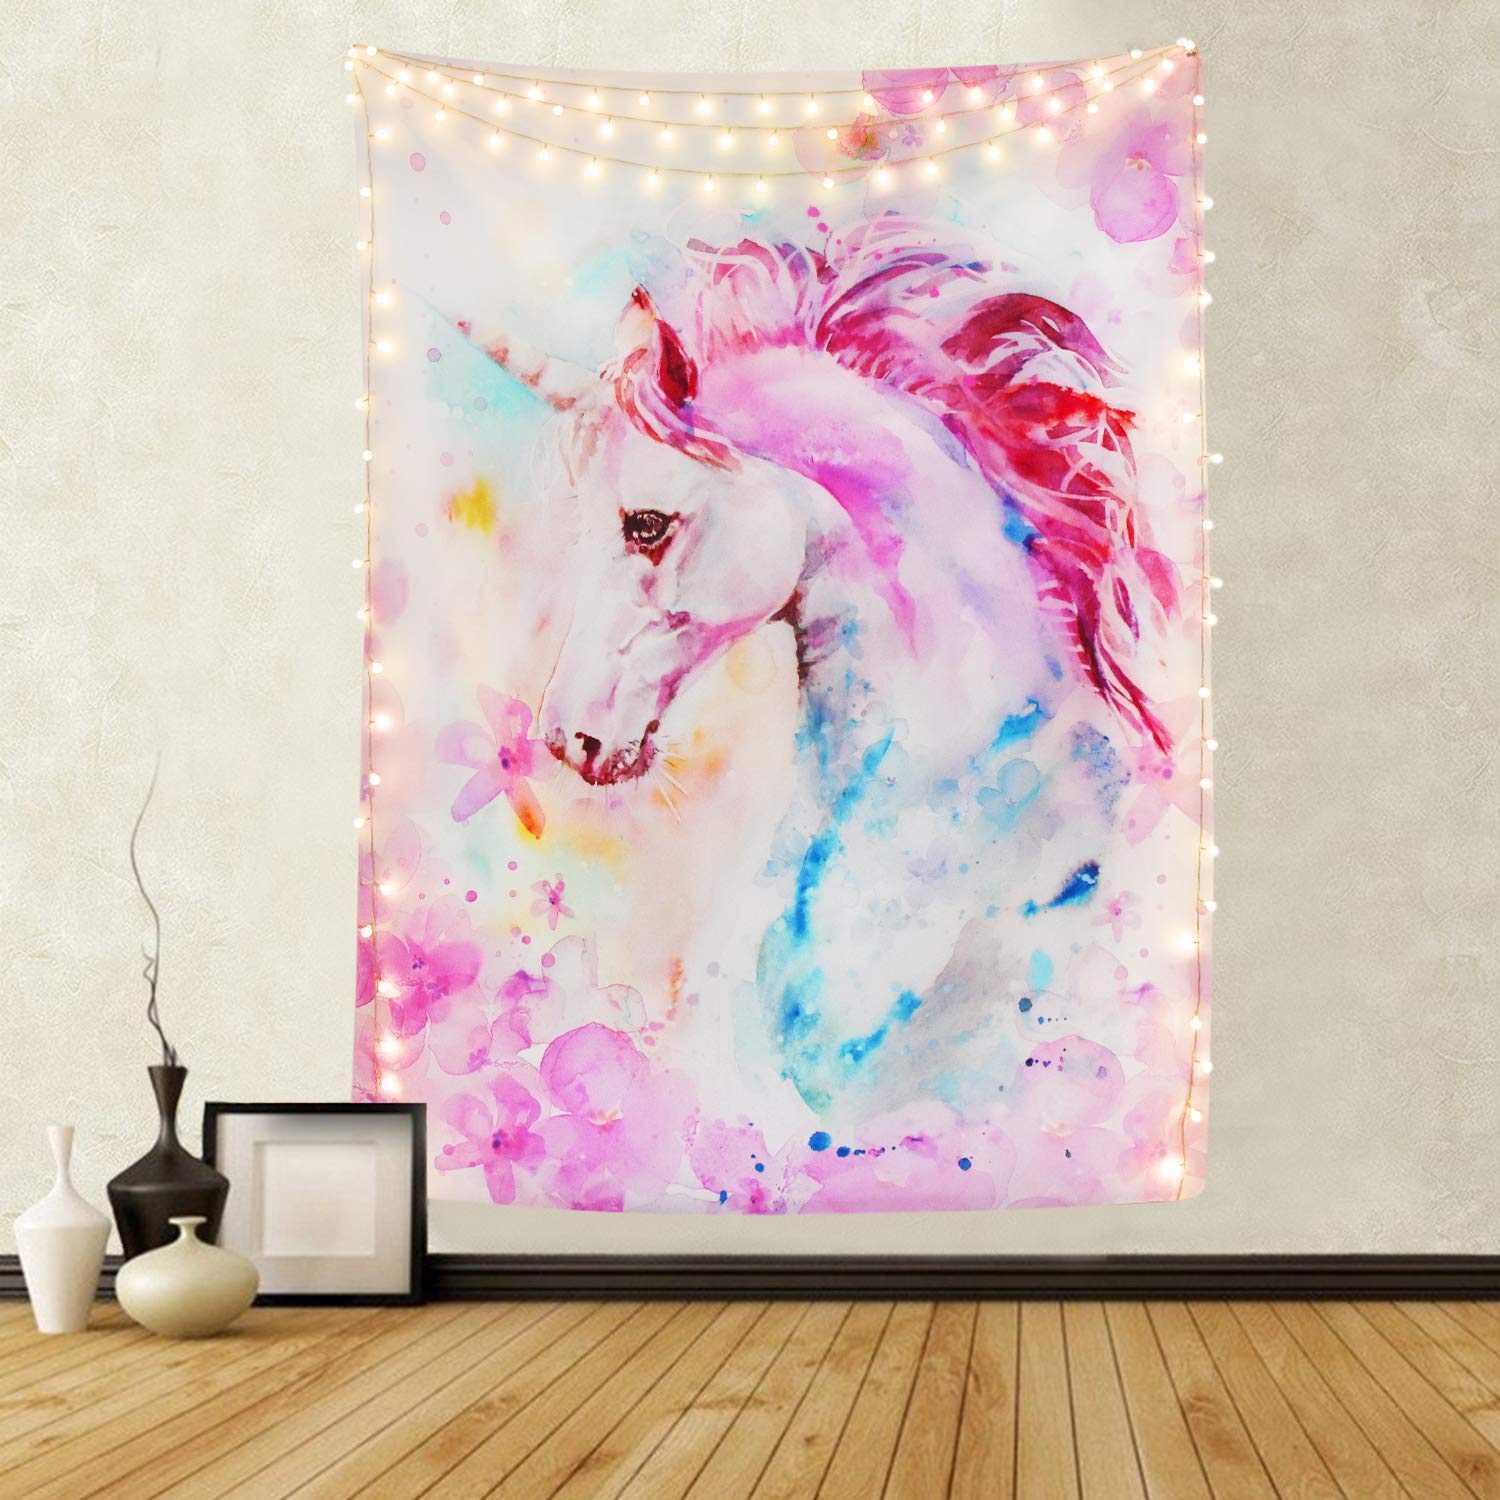 Book Cover Pink Unicorn Tapestry Watercolor Print Wall Tapestry Hippie Art Tapestry Wall Hanging for Home Decor Bedroom Living Room Dorm Room